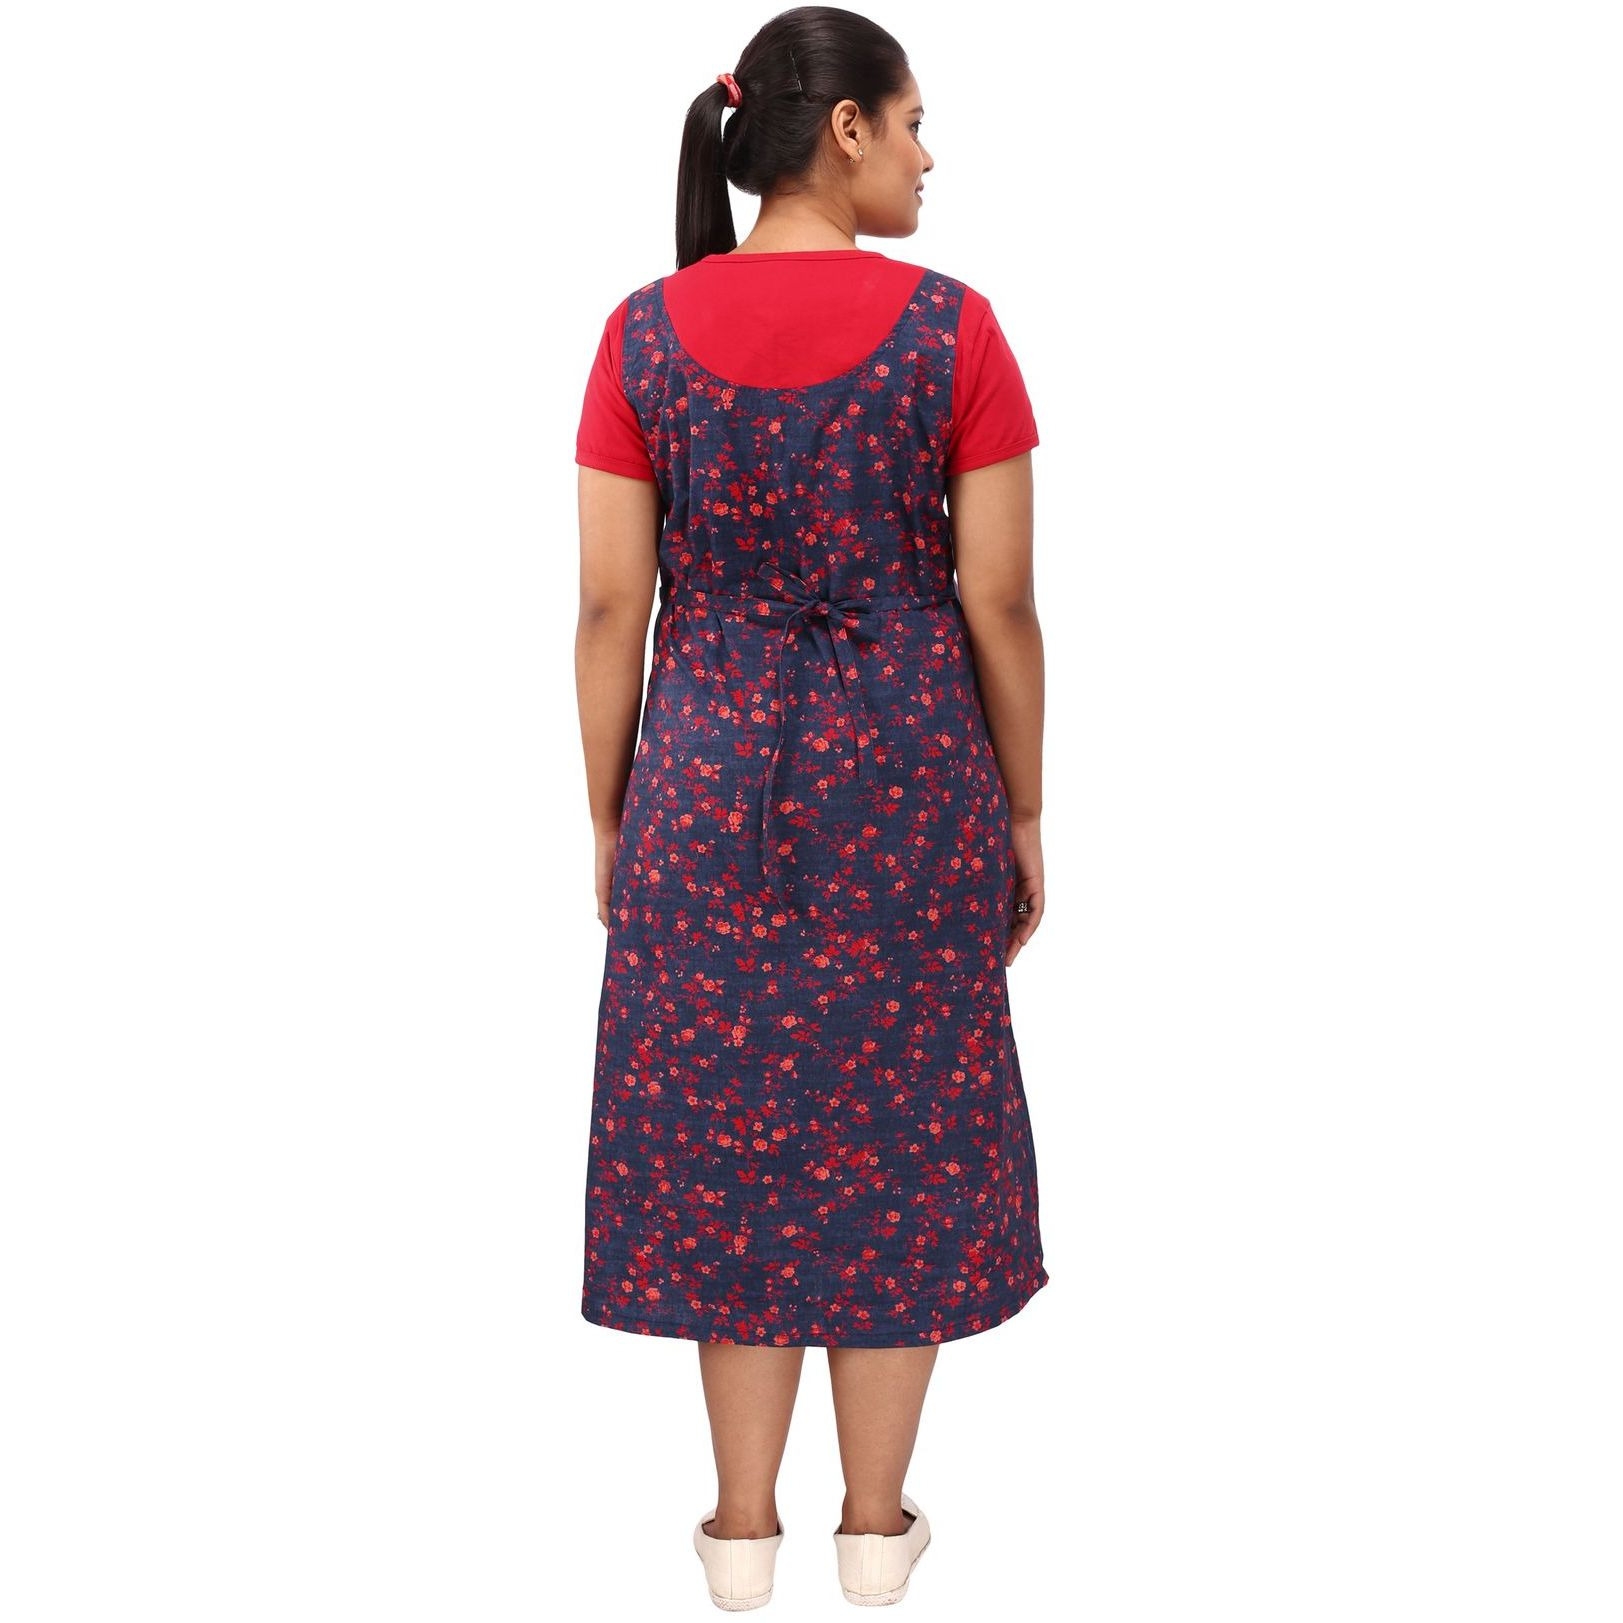 Mamma's Maternity Women's Cotton Red and Blue Maternity Dress (Size:M)